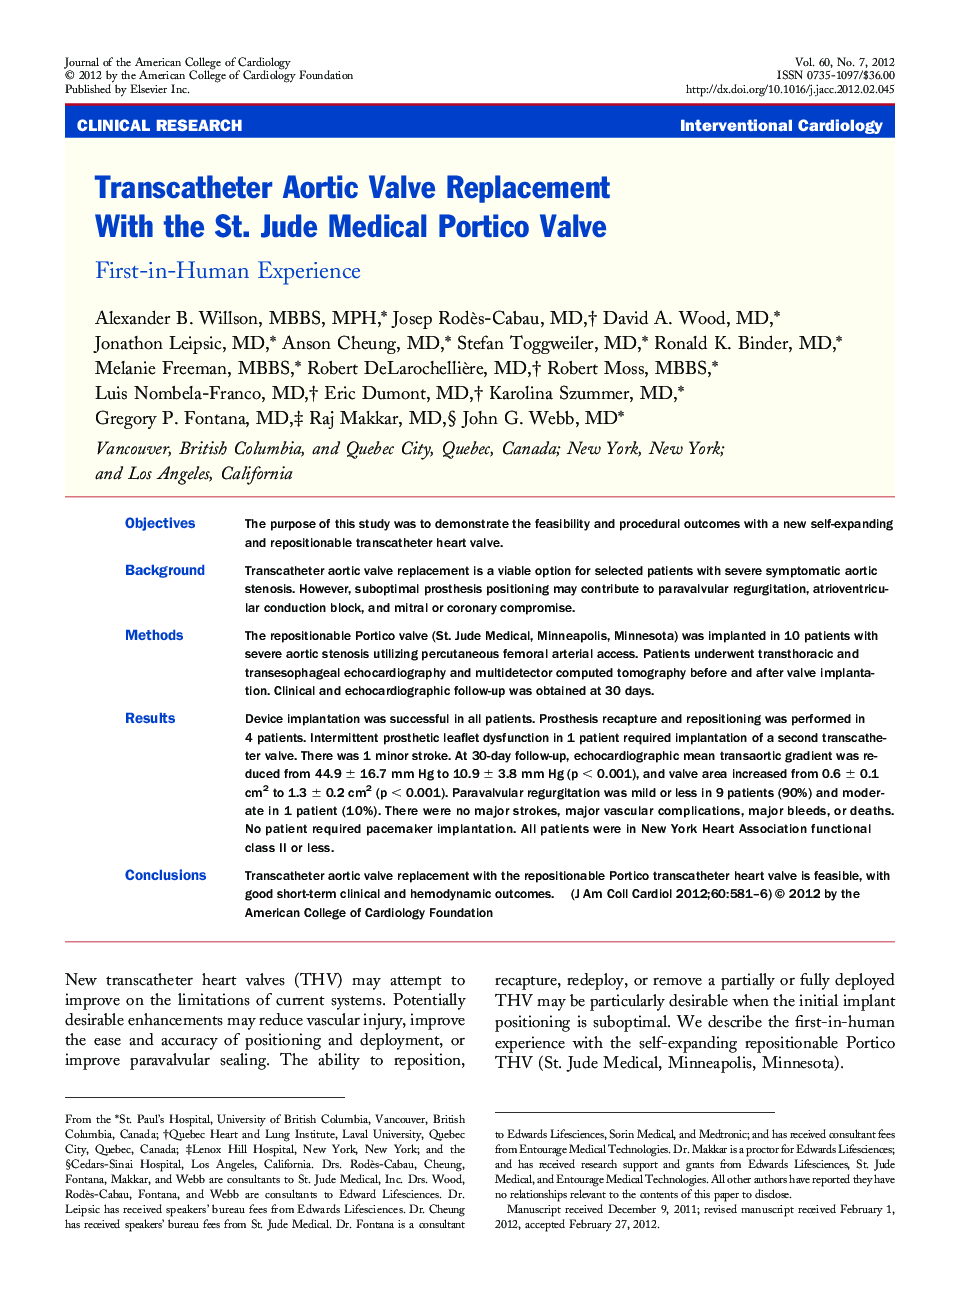 Transcatheter Aortic Valve Replacement With the St. Jude Medical Portico Valve : First-in-Human Experience